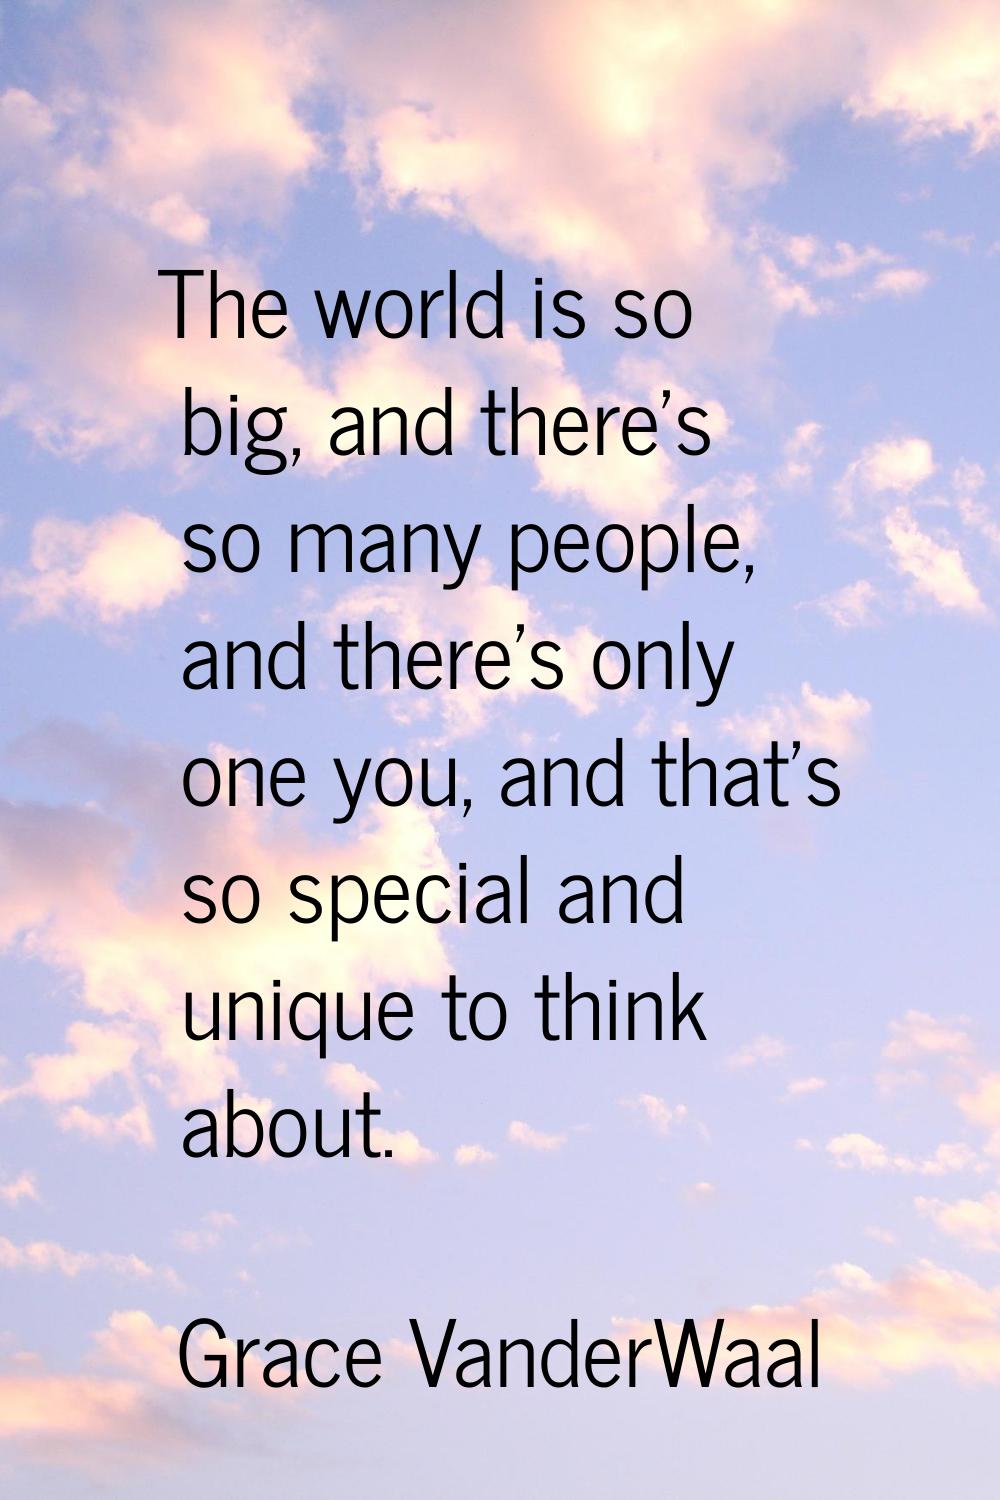 The world is so big, and there's so many people, and there's only one you, and that's so special an